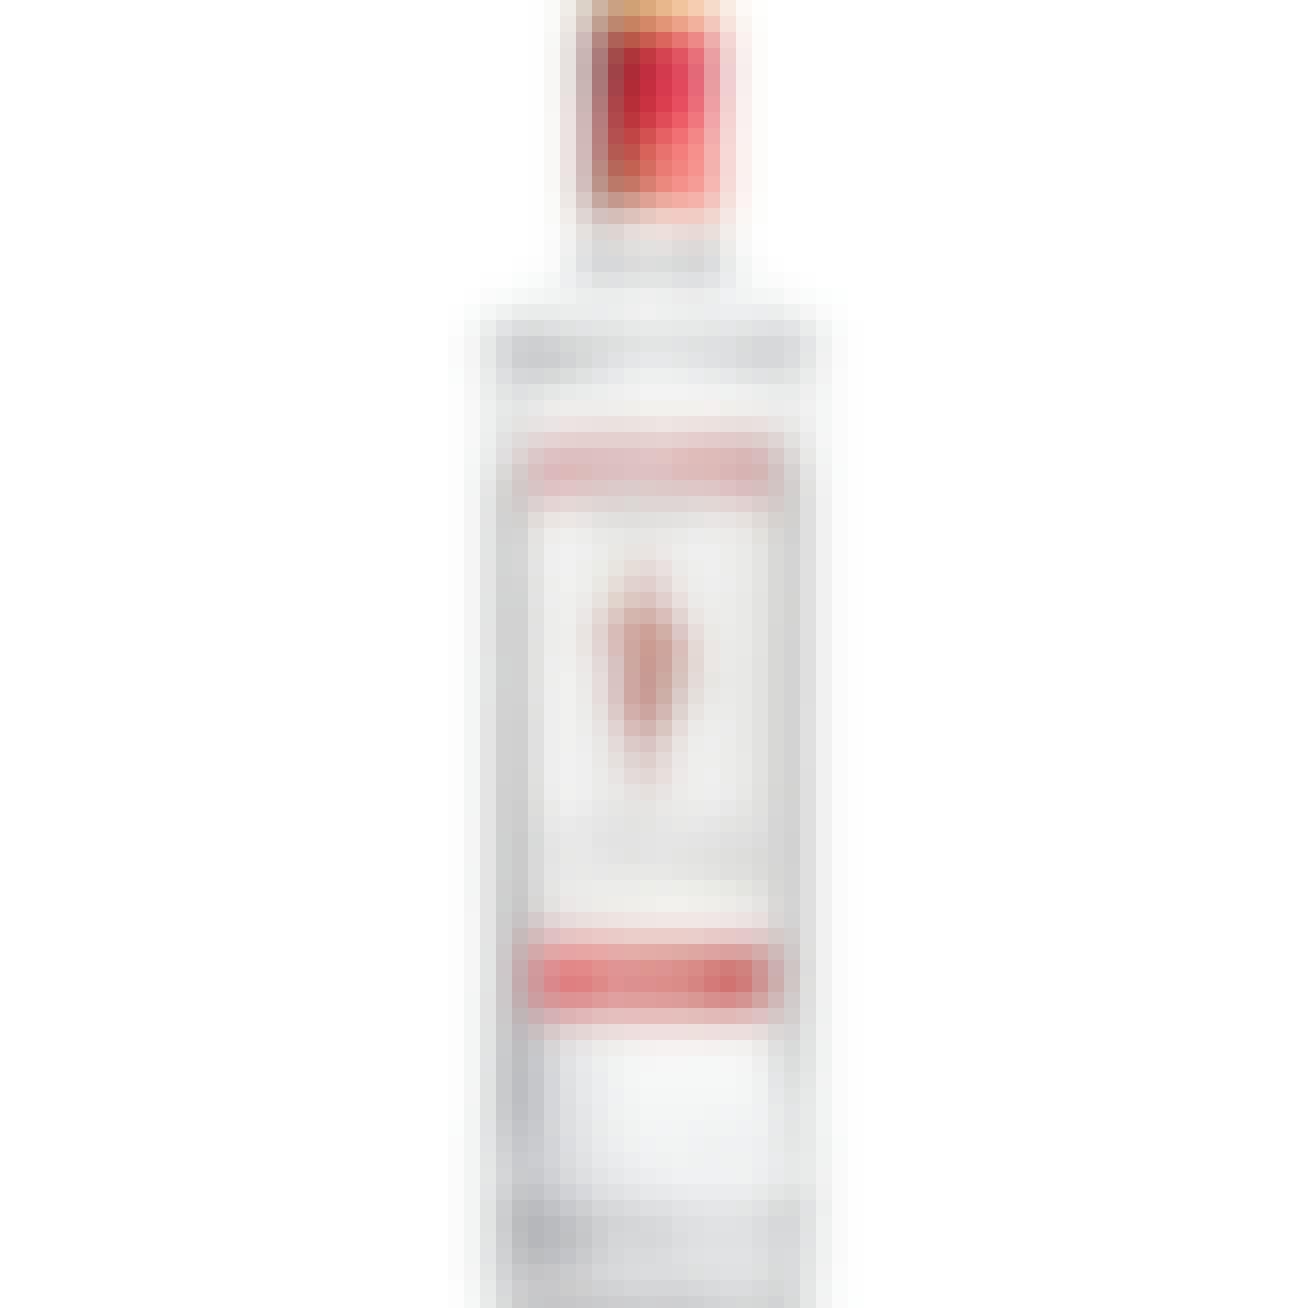 Beefeater London Dry Gin 1.5L